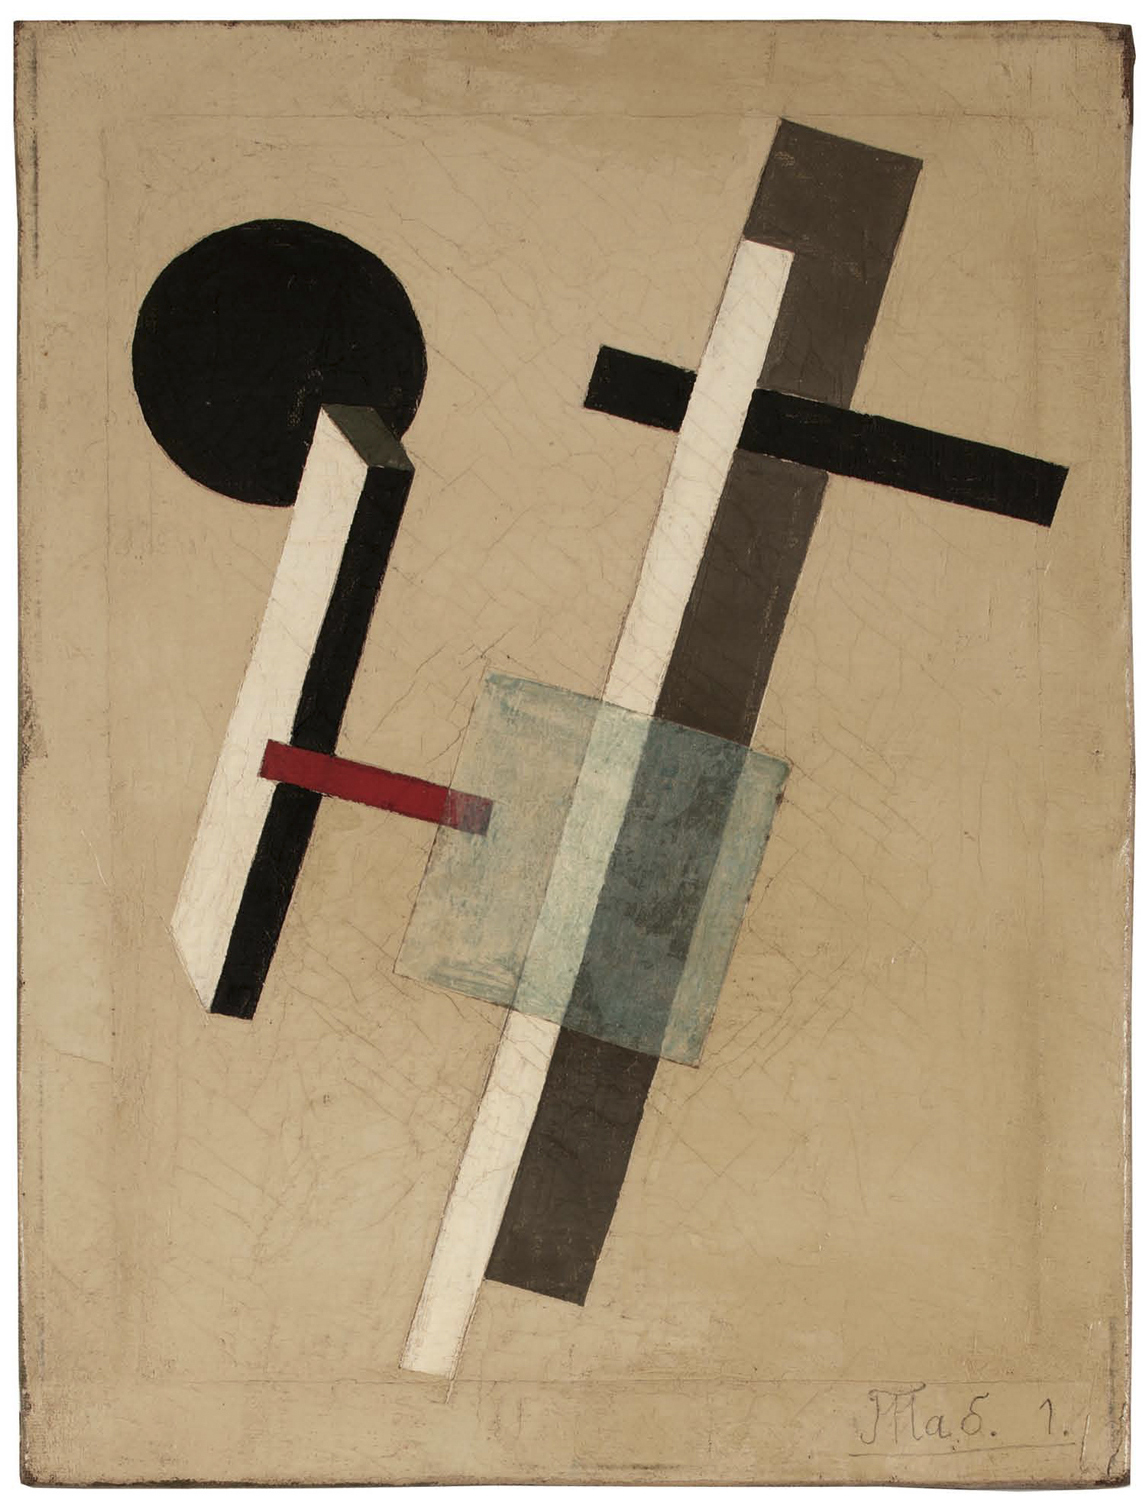  Unsigned. Unattributed.&nbsp;In the style of El Lissitzky. Text in Russian, lower left front, translates to “Tab .1”.&nbsp; Oil and collage on canvas. 40 x 30 cm. 